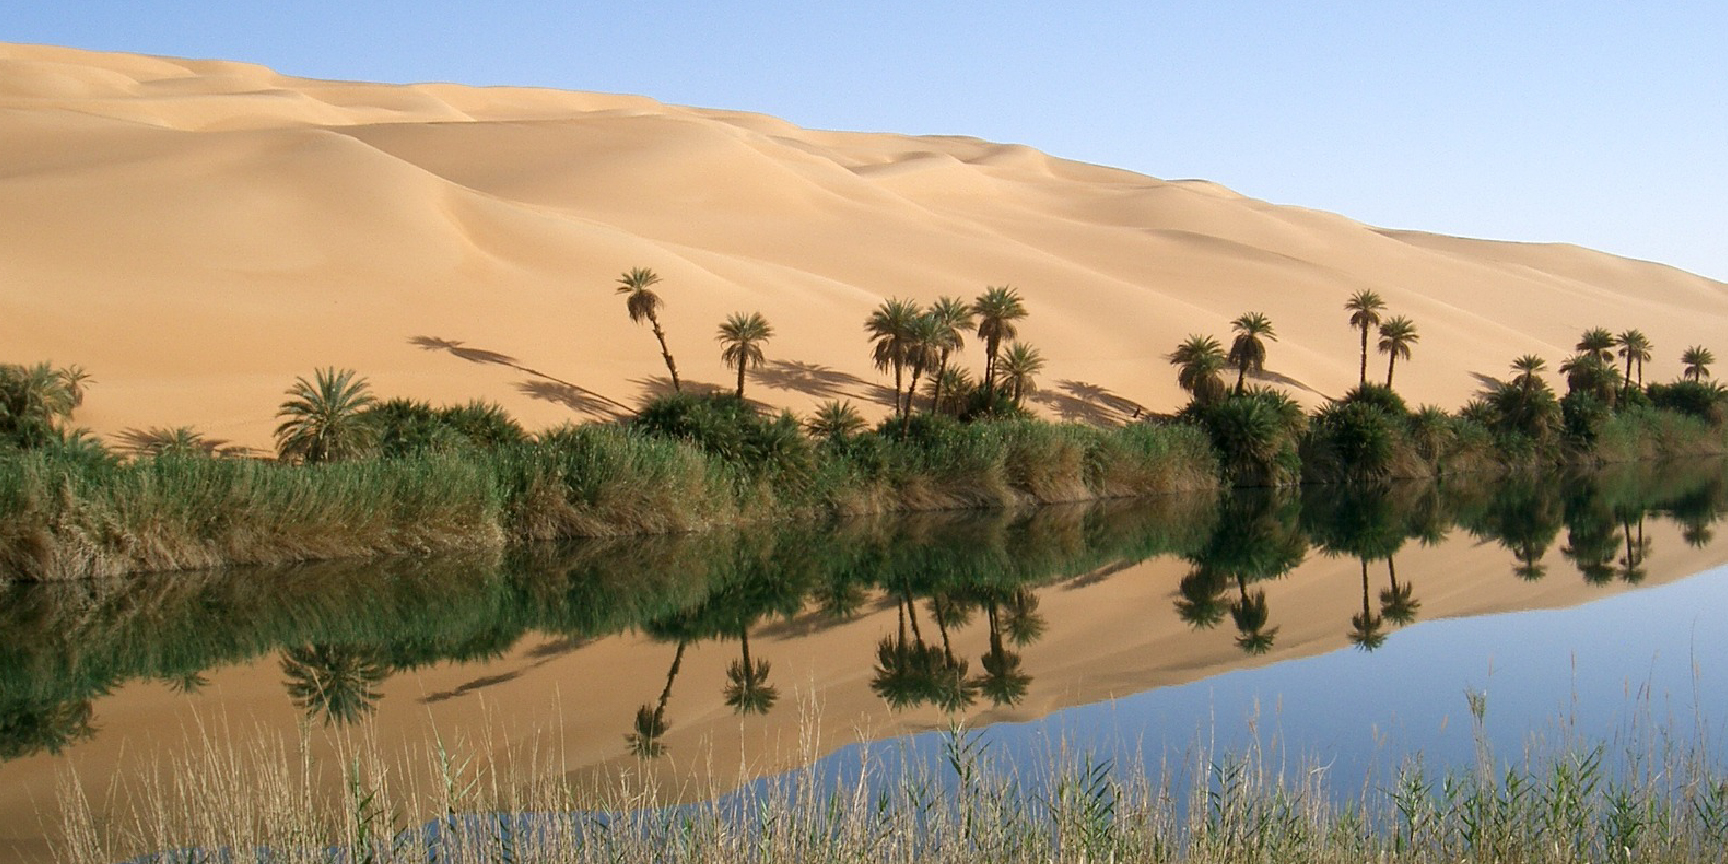 An oasis in the midst of sand dunes